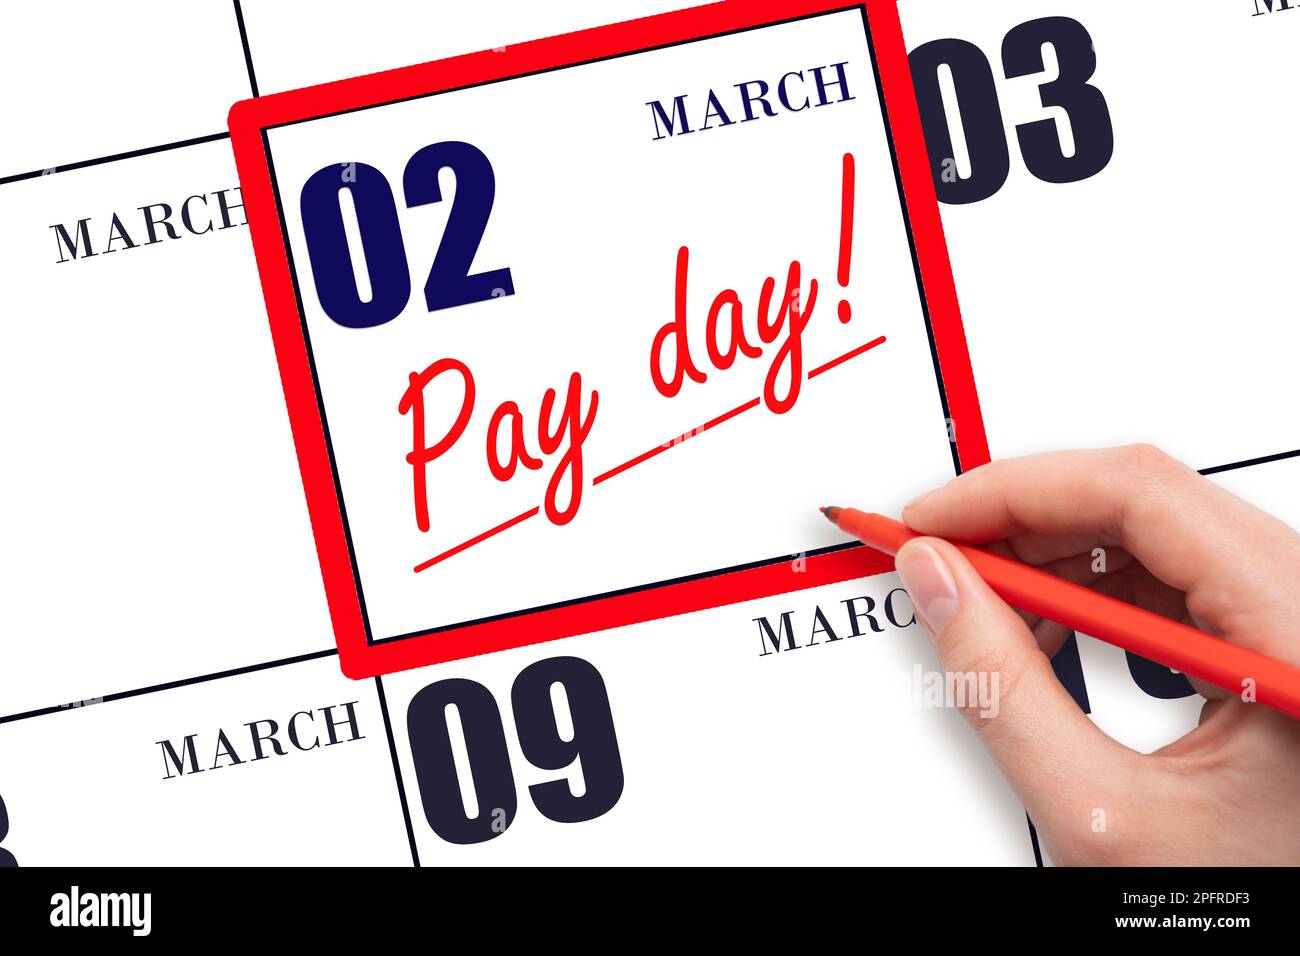 2nd day of March. Hand writing text PAY DATE on calendar date March 2 and underline it. Payment due date.  Reminder concept of payment. Spring month, Stock Photo